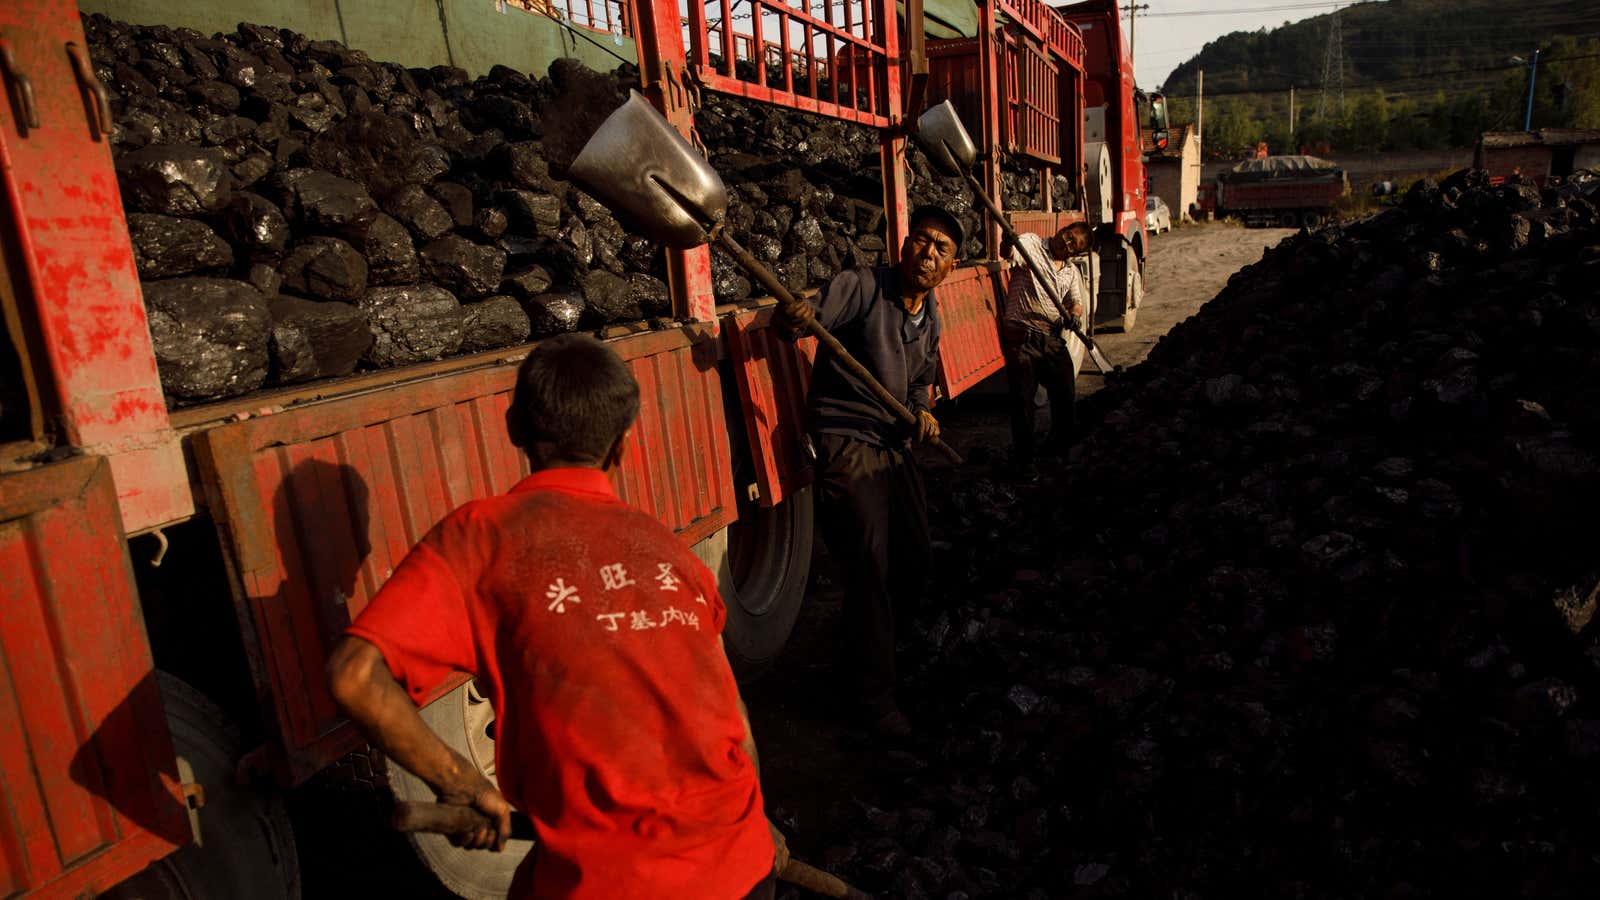 China is still investing heavily in coal, despite high-level promises to fight climate change.